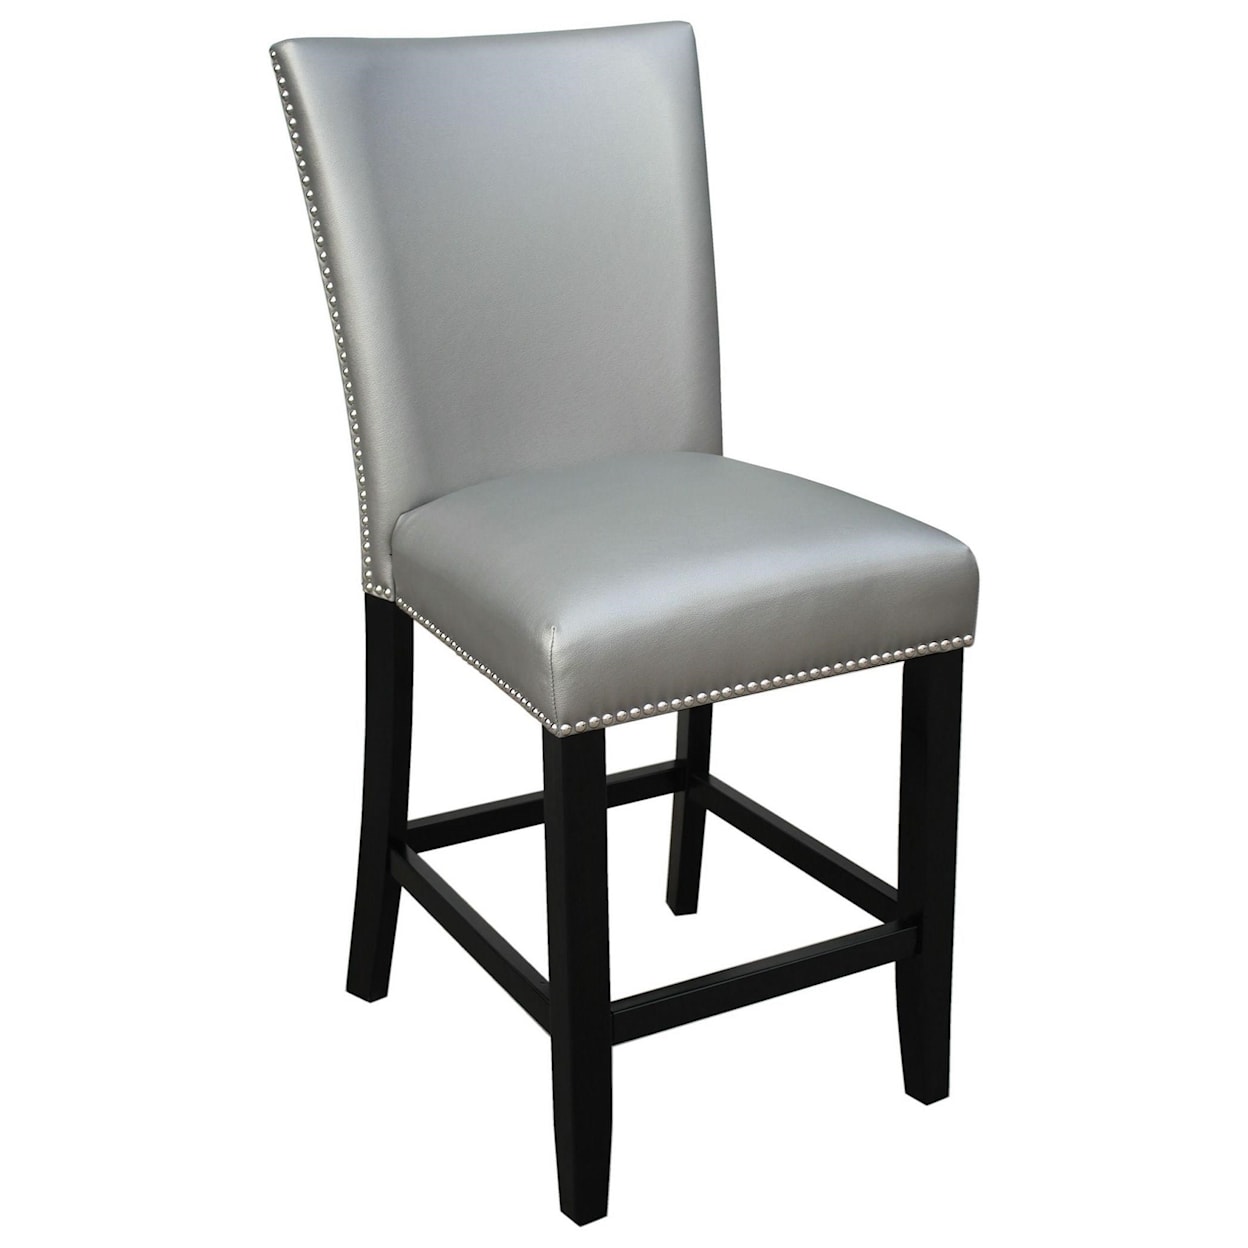 Prime Camila Upholstered Counter Chair with Nailhead